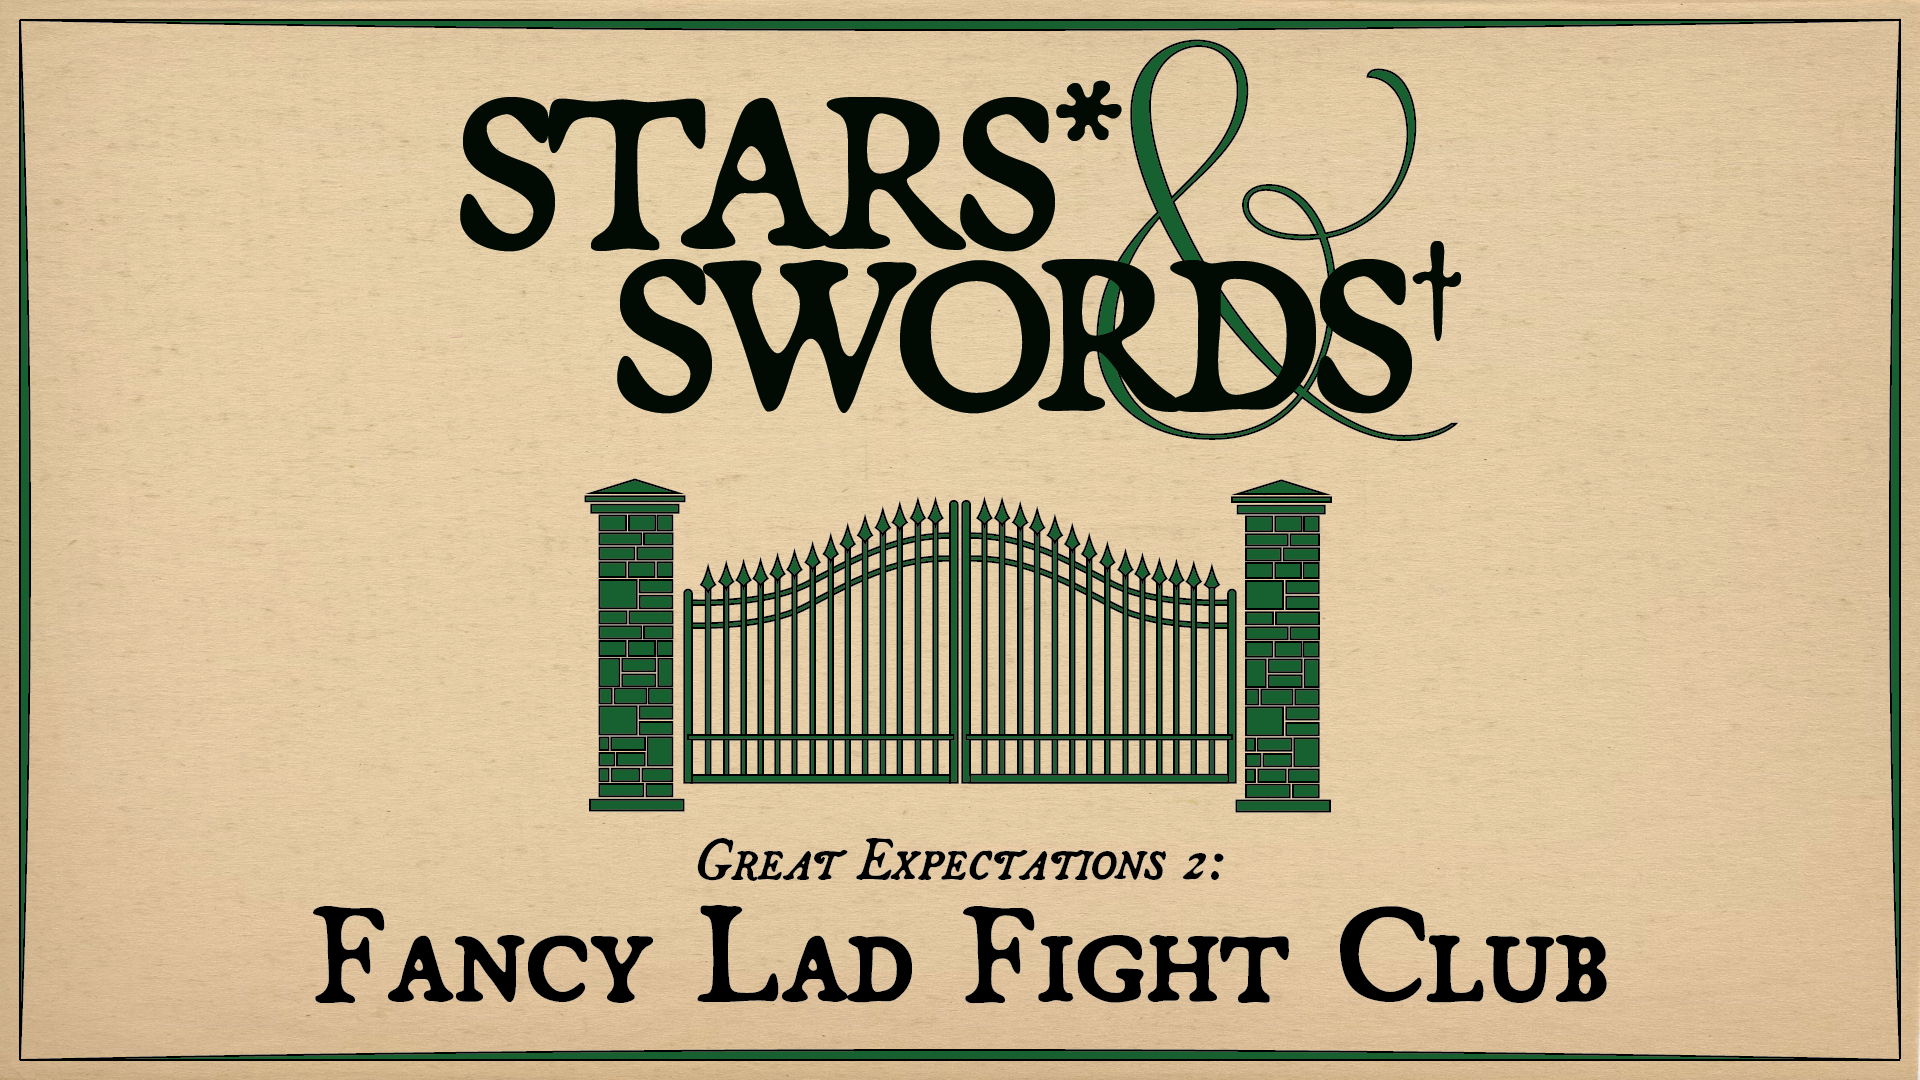 Great Expectations 2: Fancy Lad Fight Club